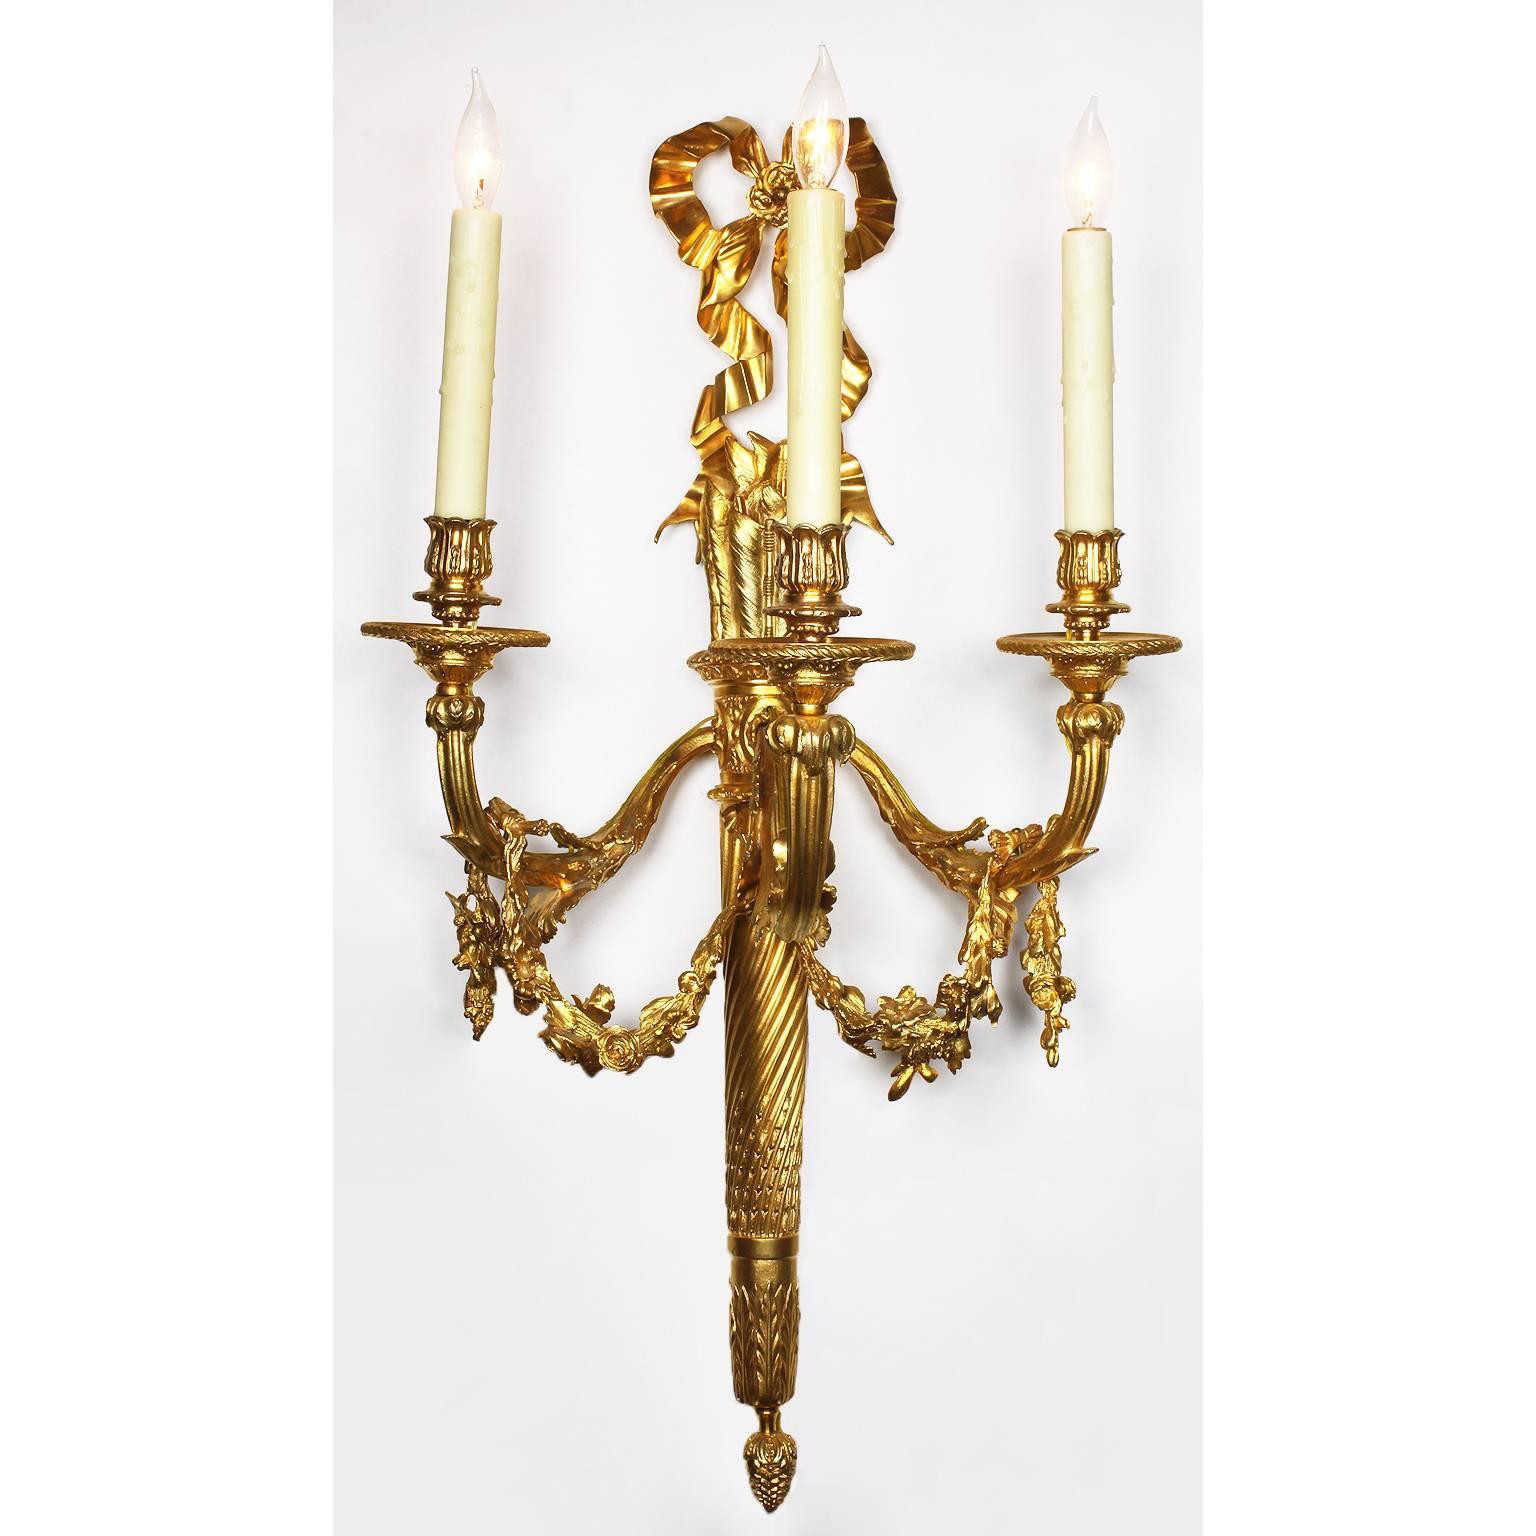 A fine pair of French 19th-20th century Louis XVI Style Gilt-Bronze Three-Light Wall Sconces. The back plate in the form of a torch with three scrolled candle arms protruding from the center frame, each arm conjoined floral wreath swags. The upper